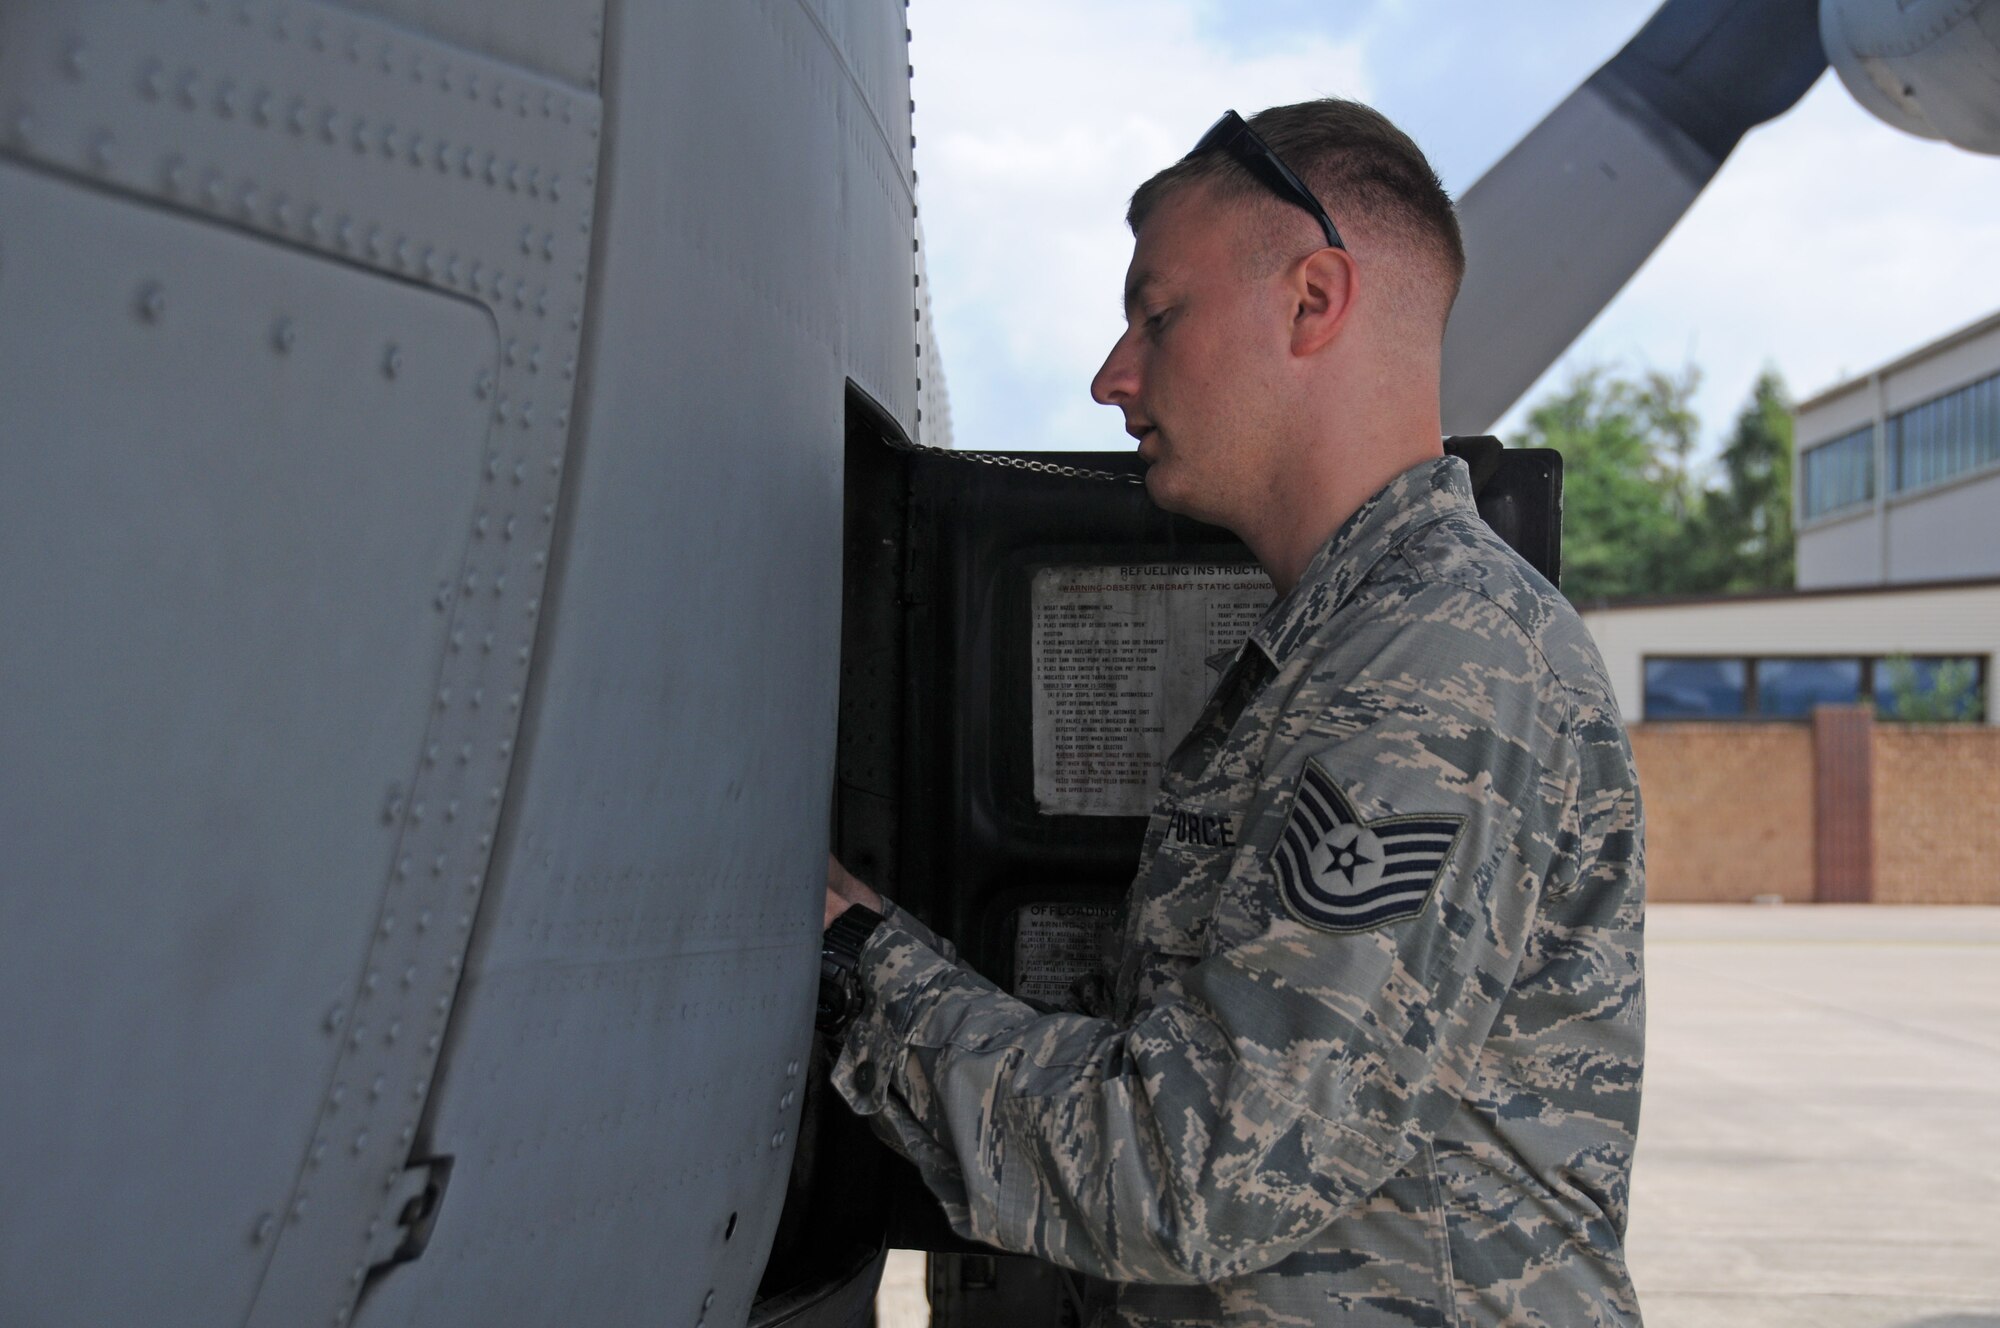 Tech. Sgt Joel Putnam, a 94th Aircraft Maintenance Squadron crew chief, prepares a C-130H3 Hercules for fueling at Ramstein Air Base, Germany June 14, 2018. Joel and his brother Jeremy are both assigned to the 94th Maintenance Group at Dobbins Air Reserve Base, Ga. (U.S. Air Force photo/Senior Airman Justin Clayvon)